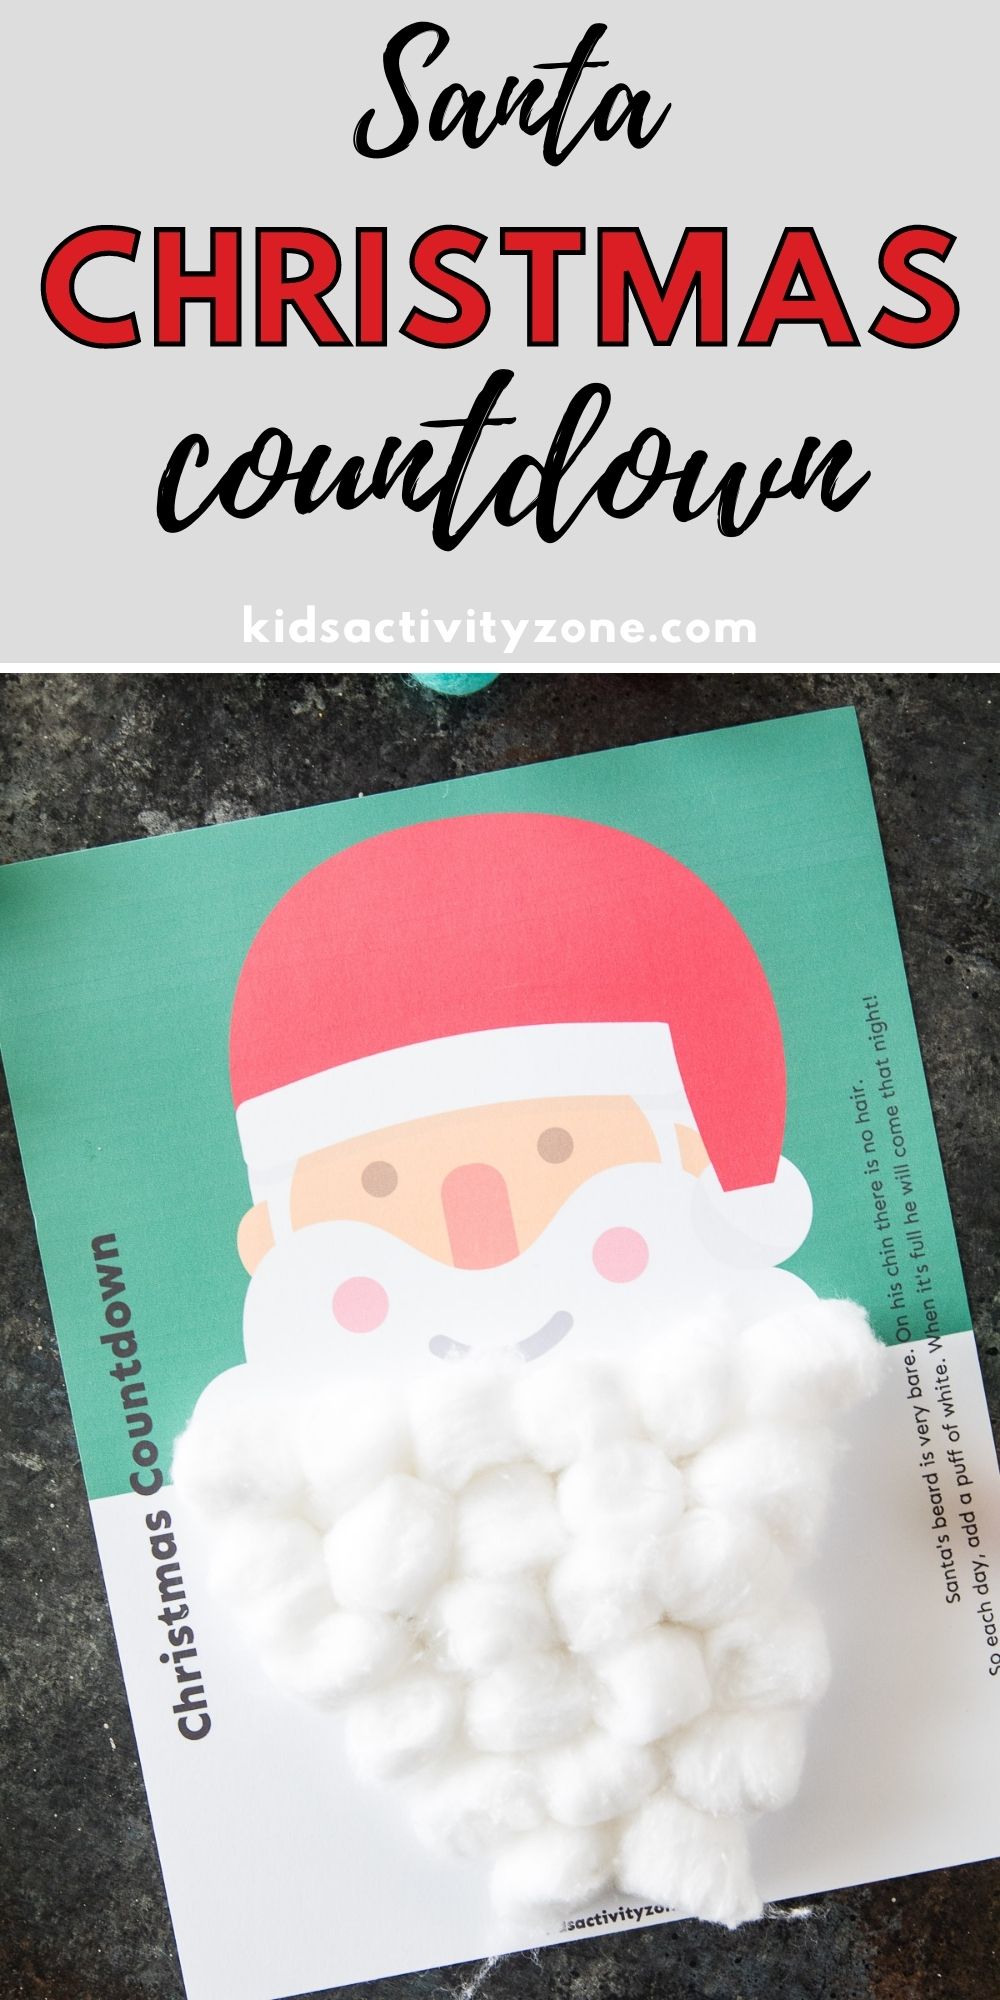 Adorable Santa Christmas Countdown is perfect for busy families. All you need to do is print it, grab your cotton balls and glue. Each day you glue on a cotton ball and form Santa's Beard. When you have a beard it's Christmas the next day!